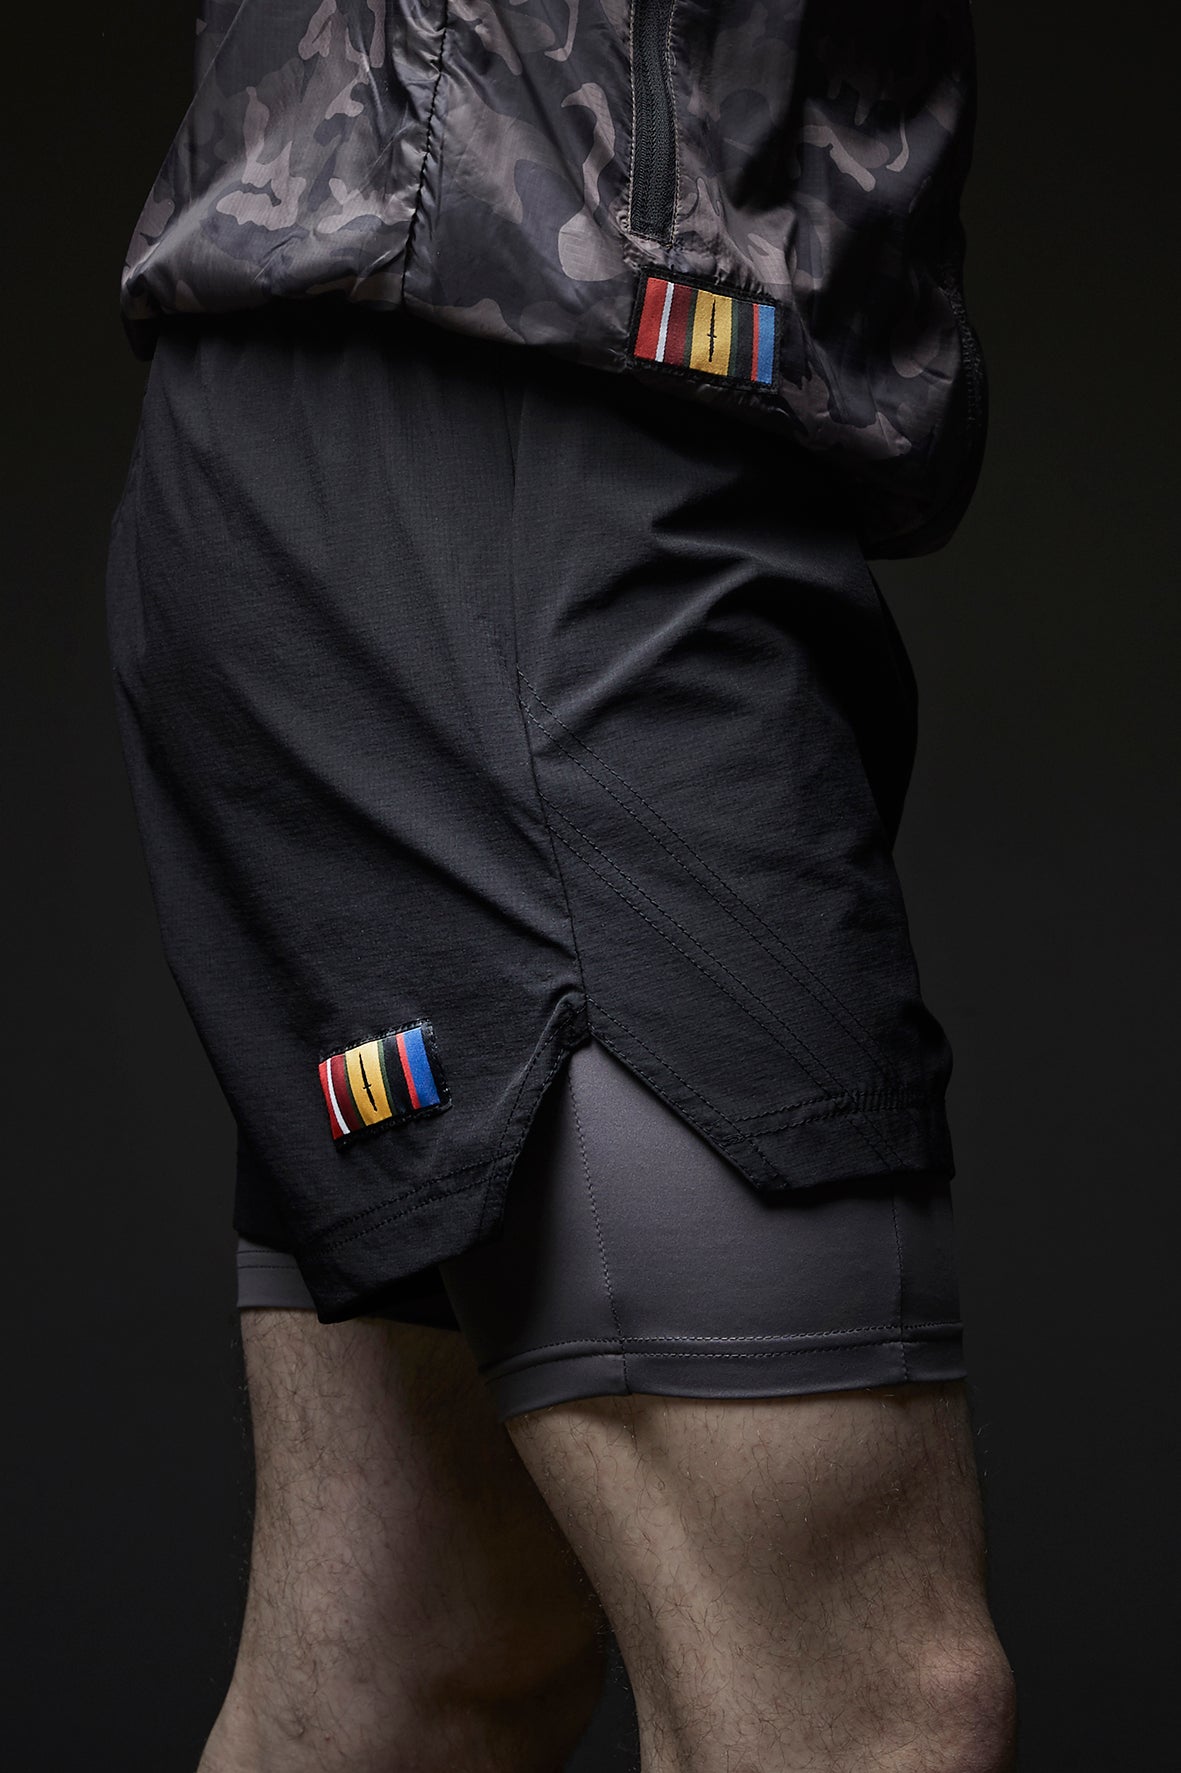 DIVISION 2 in 1 shorts,  5" BLACK